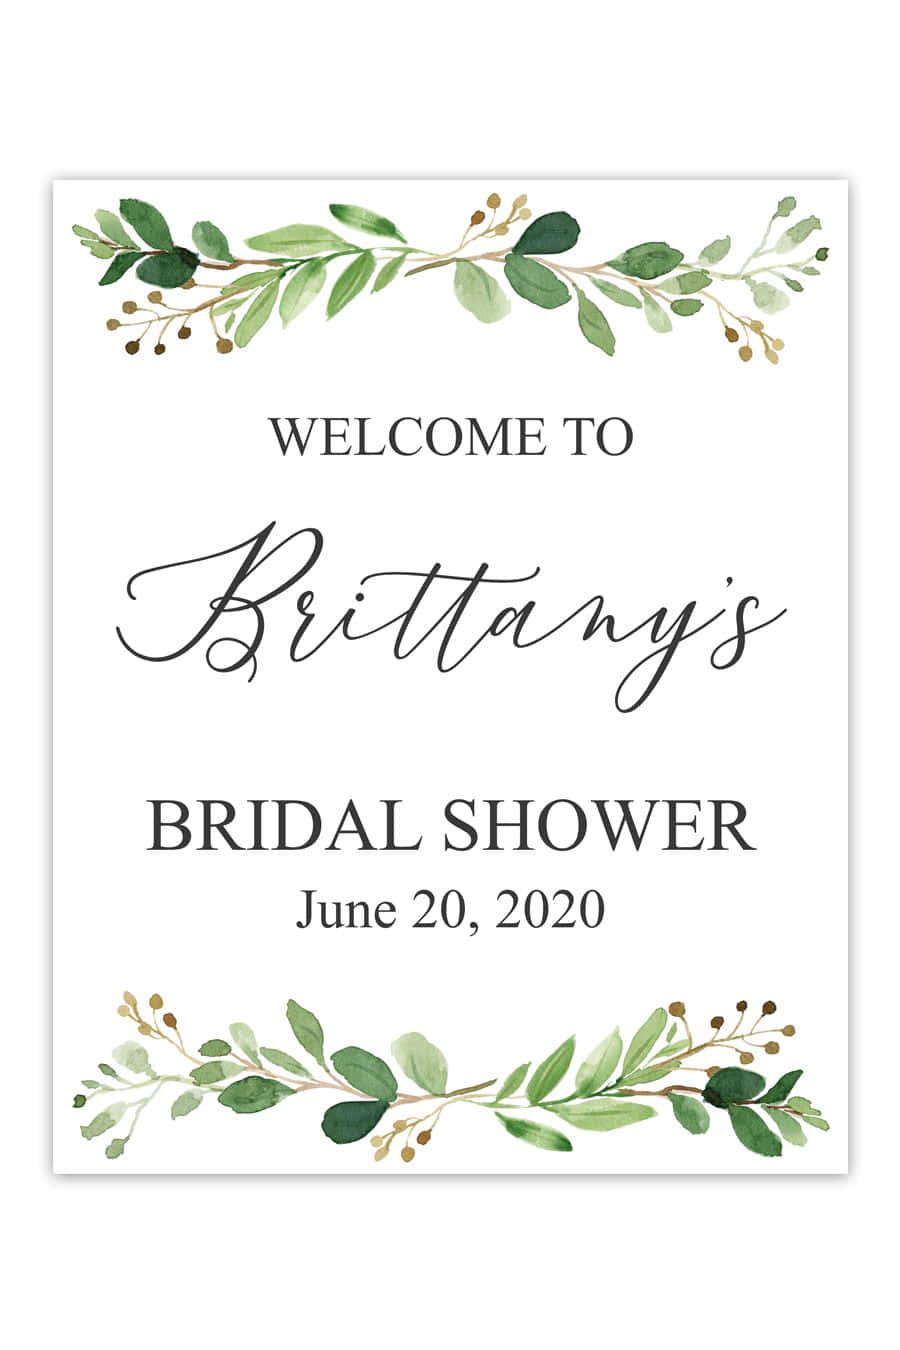 A Welcome Sign With Green Leaves And The Word Bridal Shower